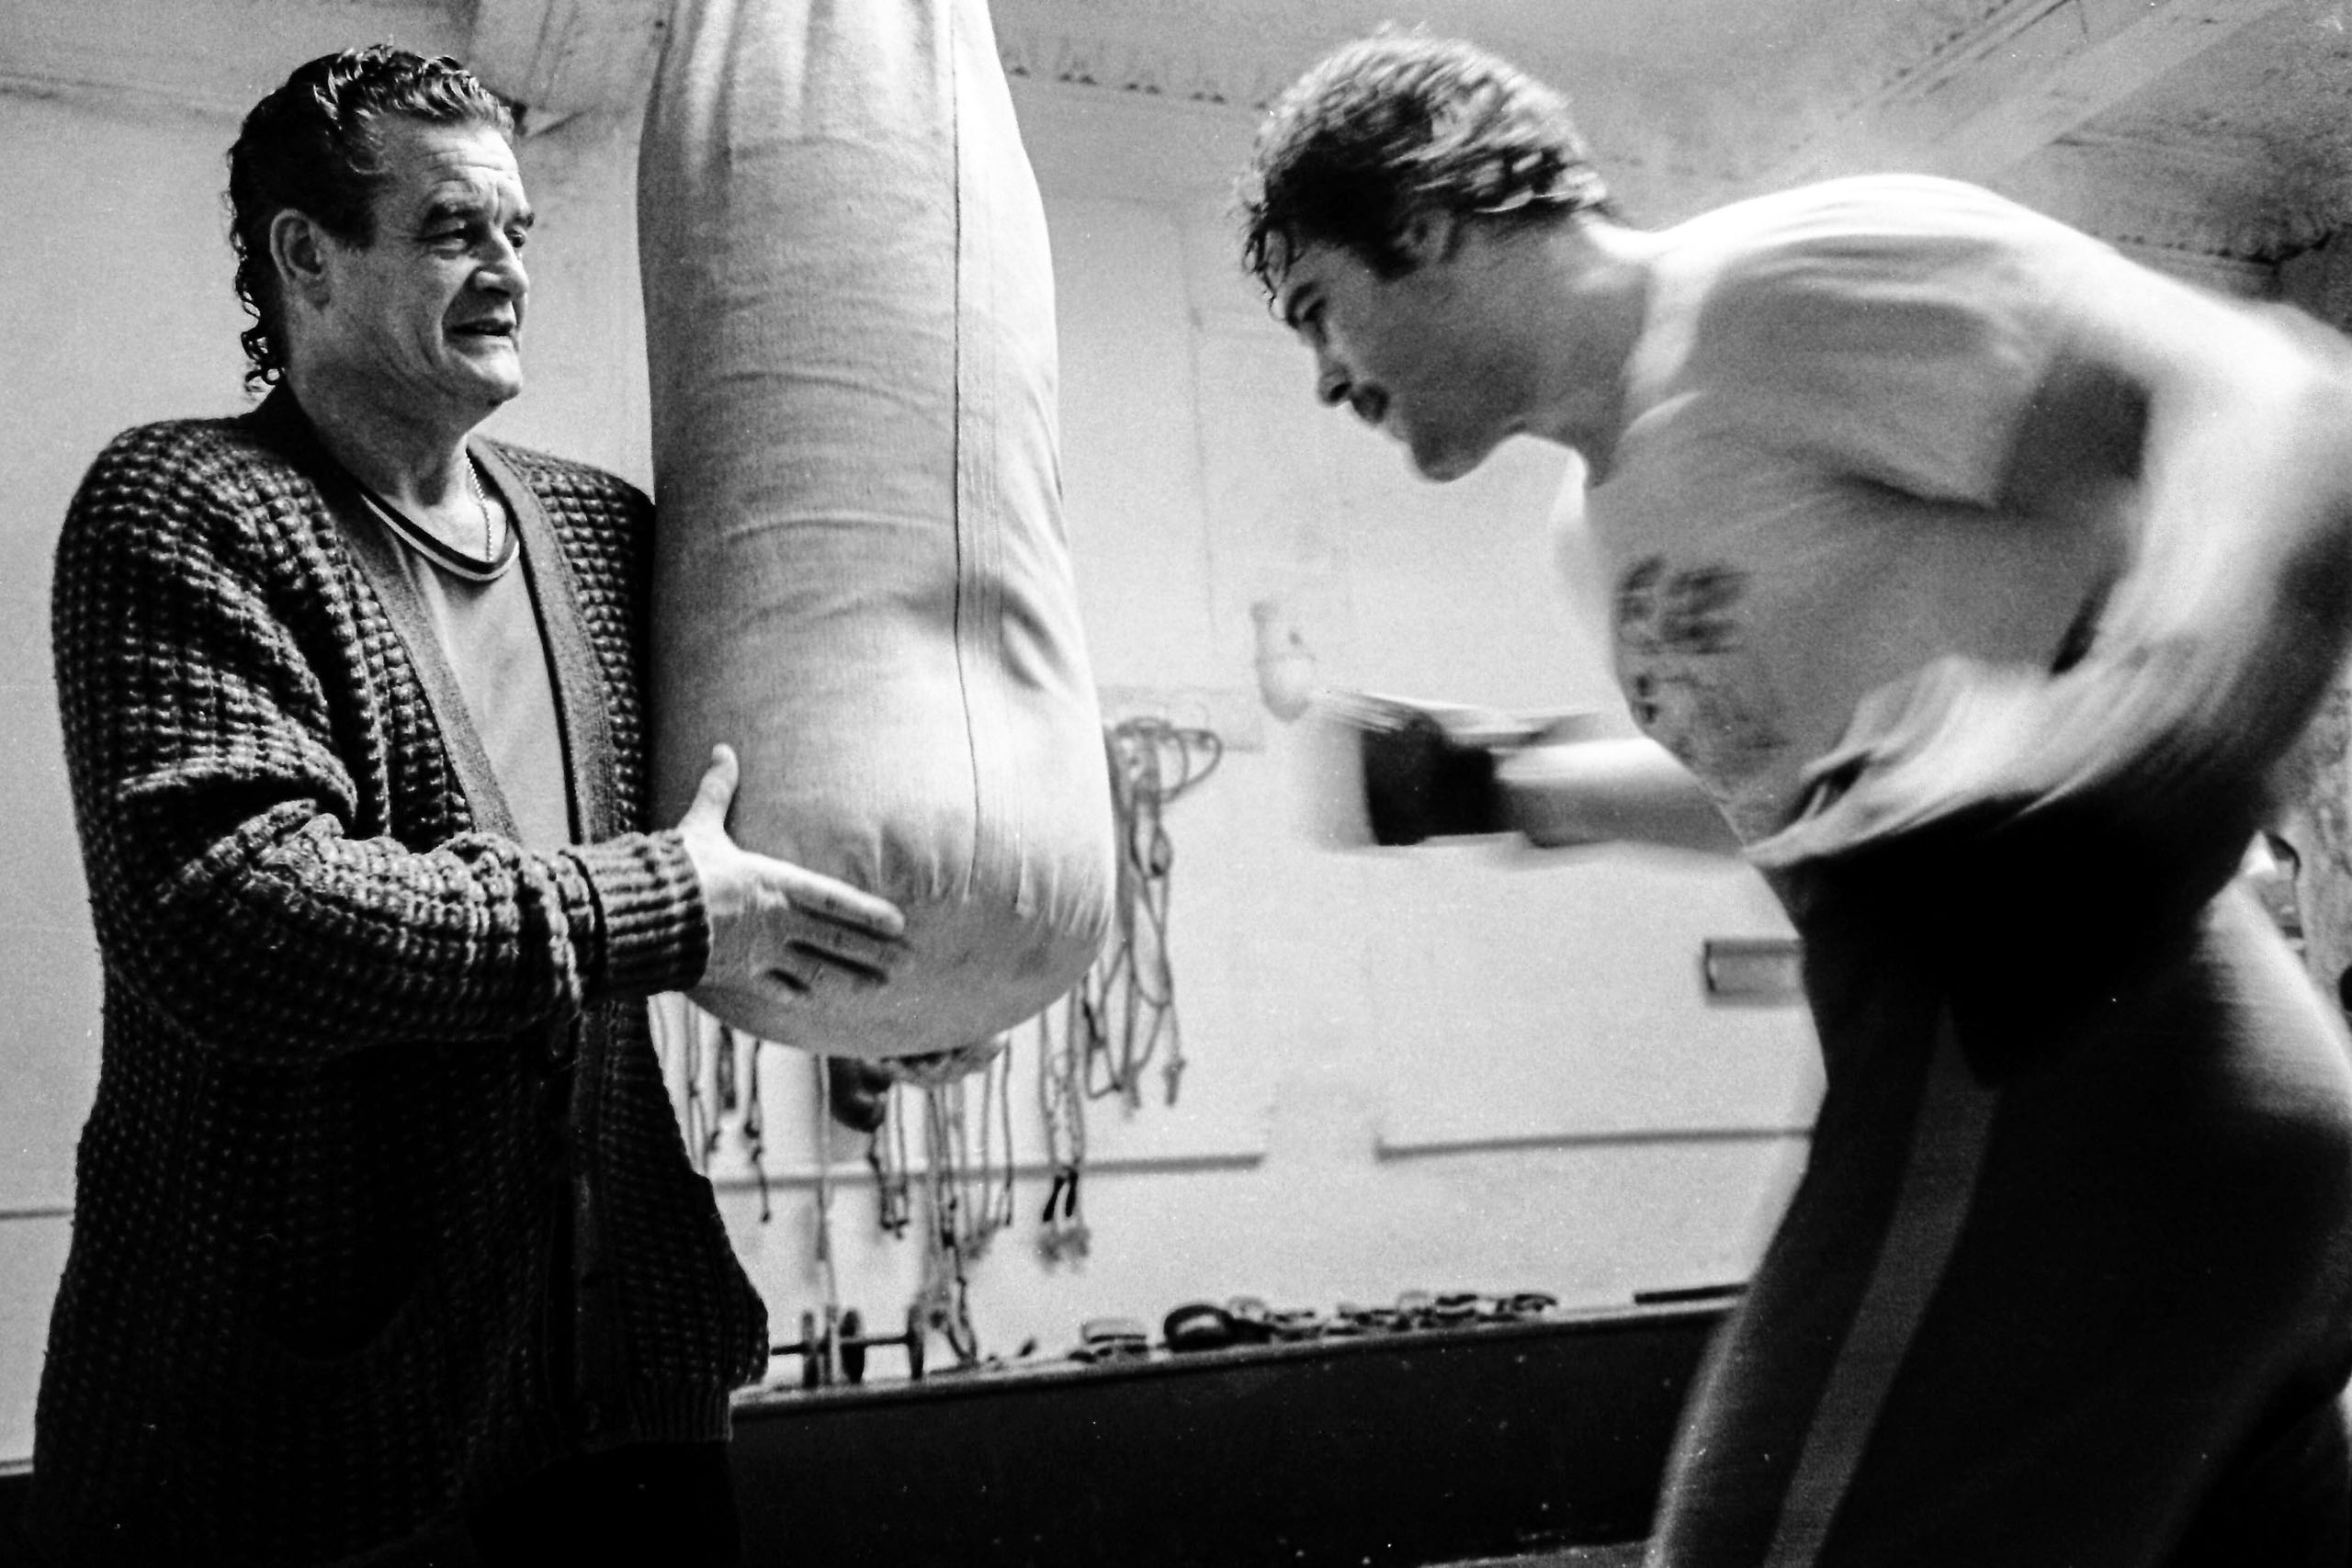 David Pearce training with his father Wally at the Waterloo Hotel in Newport before his British Heavyweight Title fight with Neville Meade in Cardiff